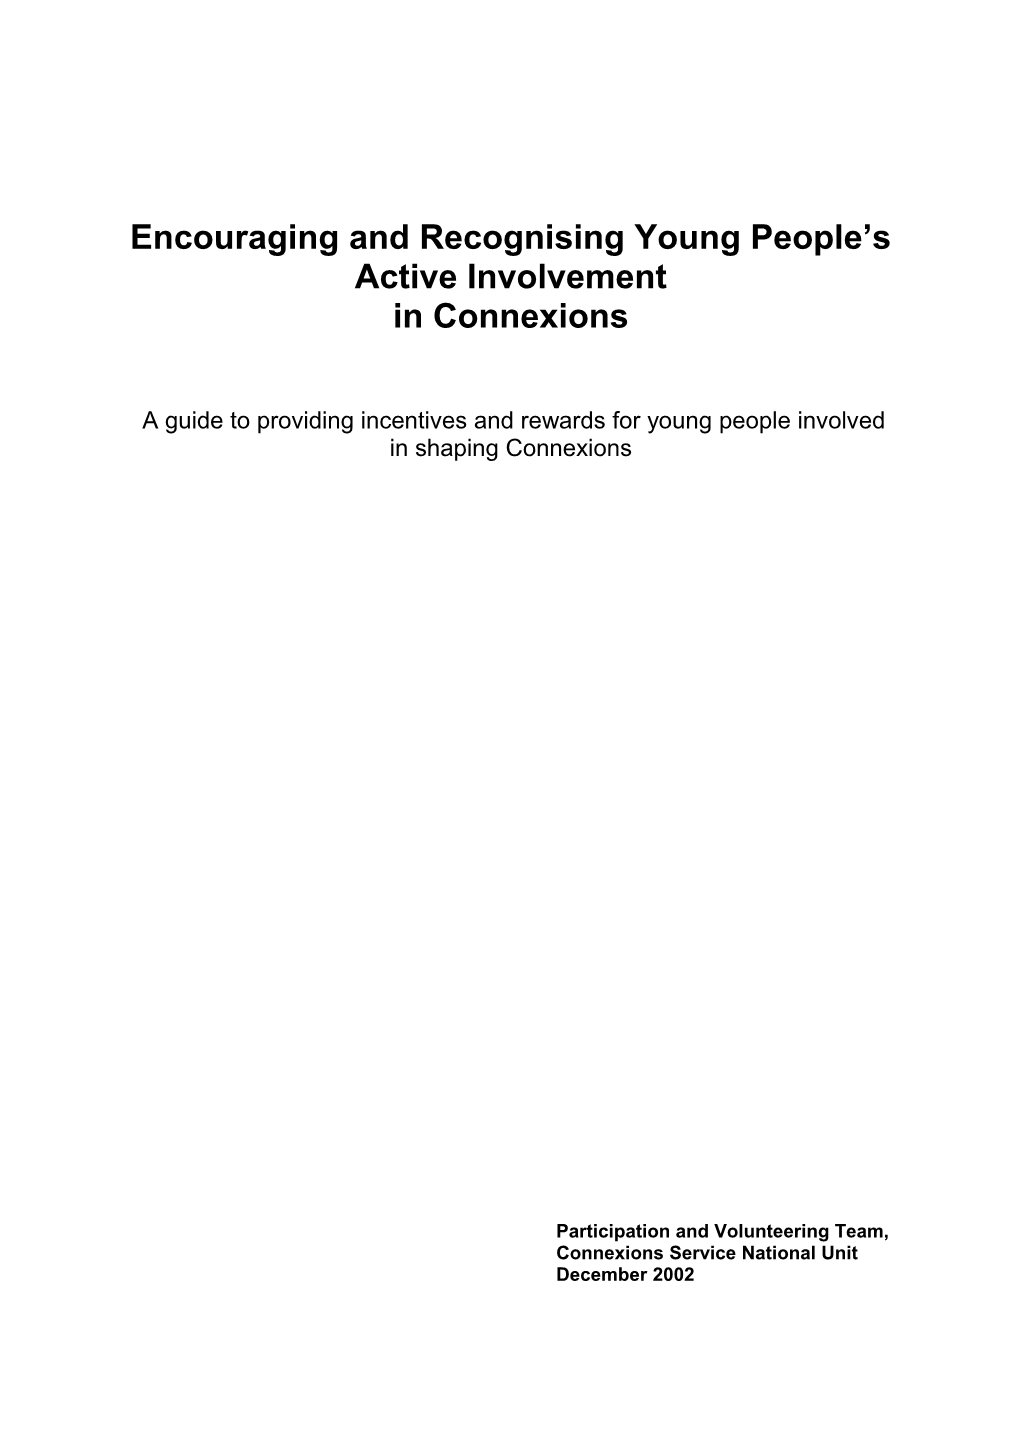 Guidance on Rewards and Incentives for Young People S Involvement in Connexions